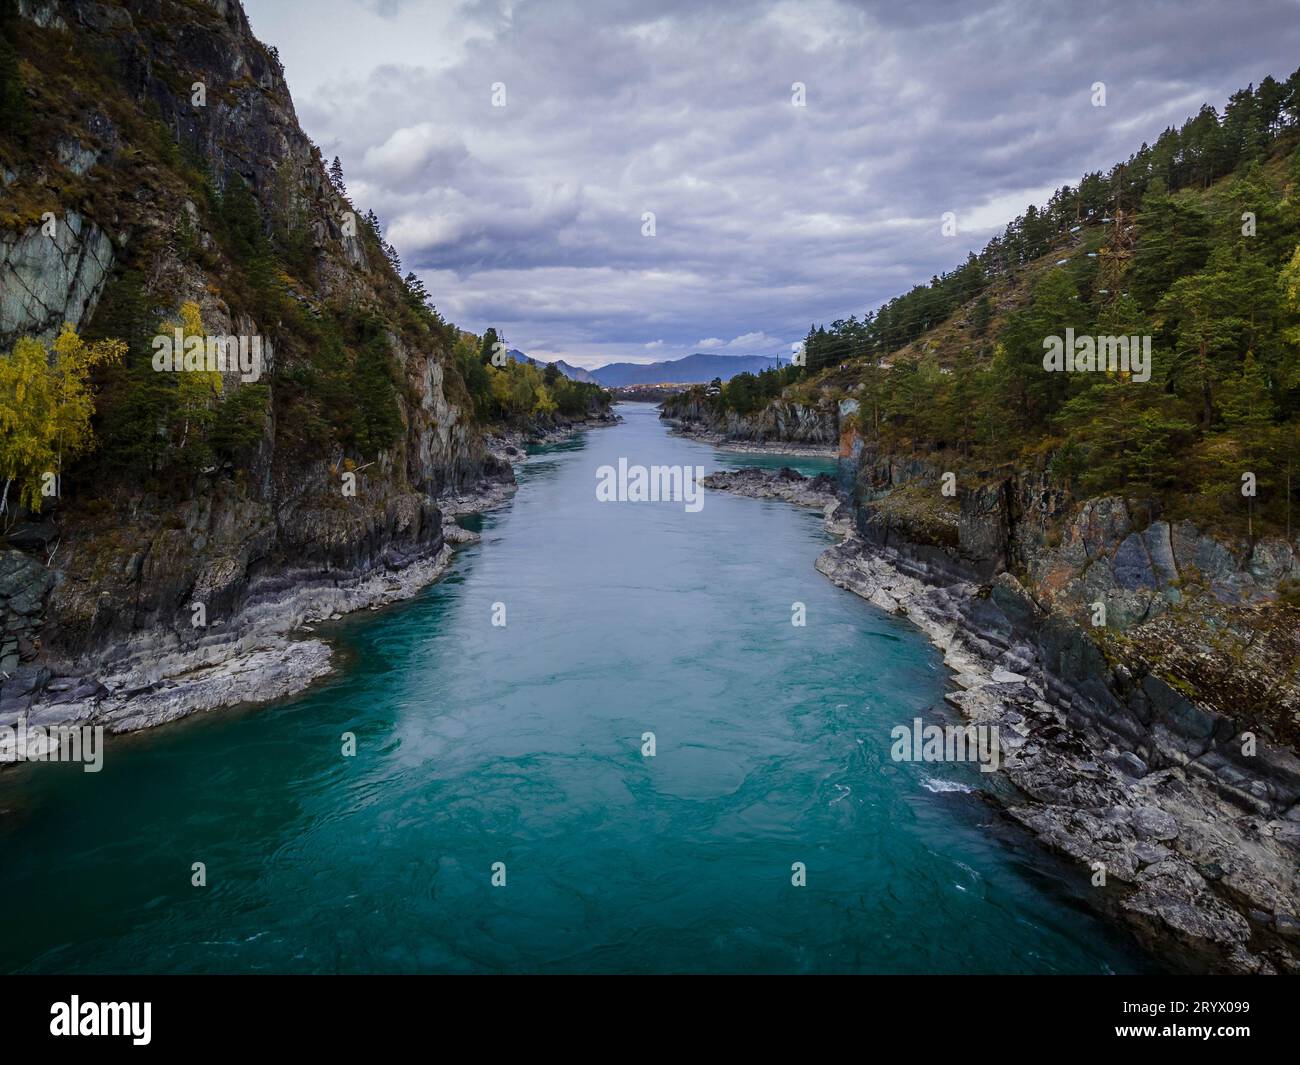 The drone photography of the Katun river with turquoise water in Altai mountains in Siberia, Russia. Stock Photo